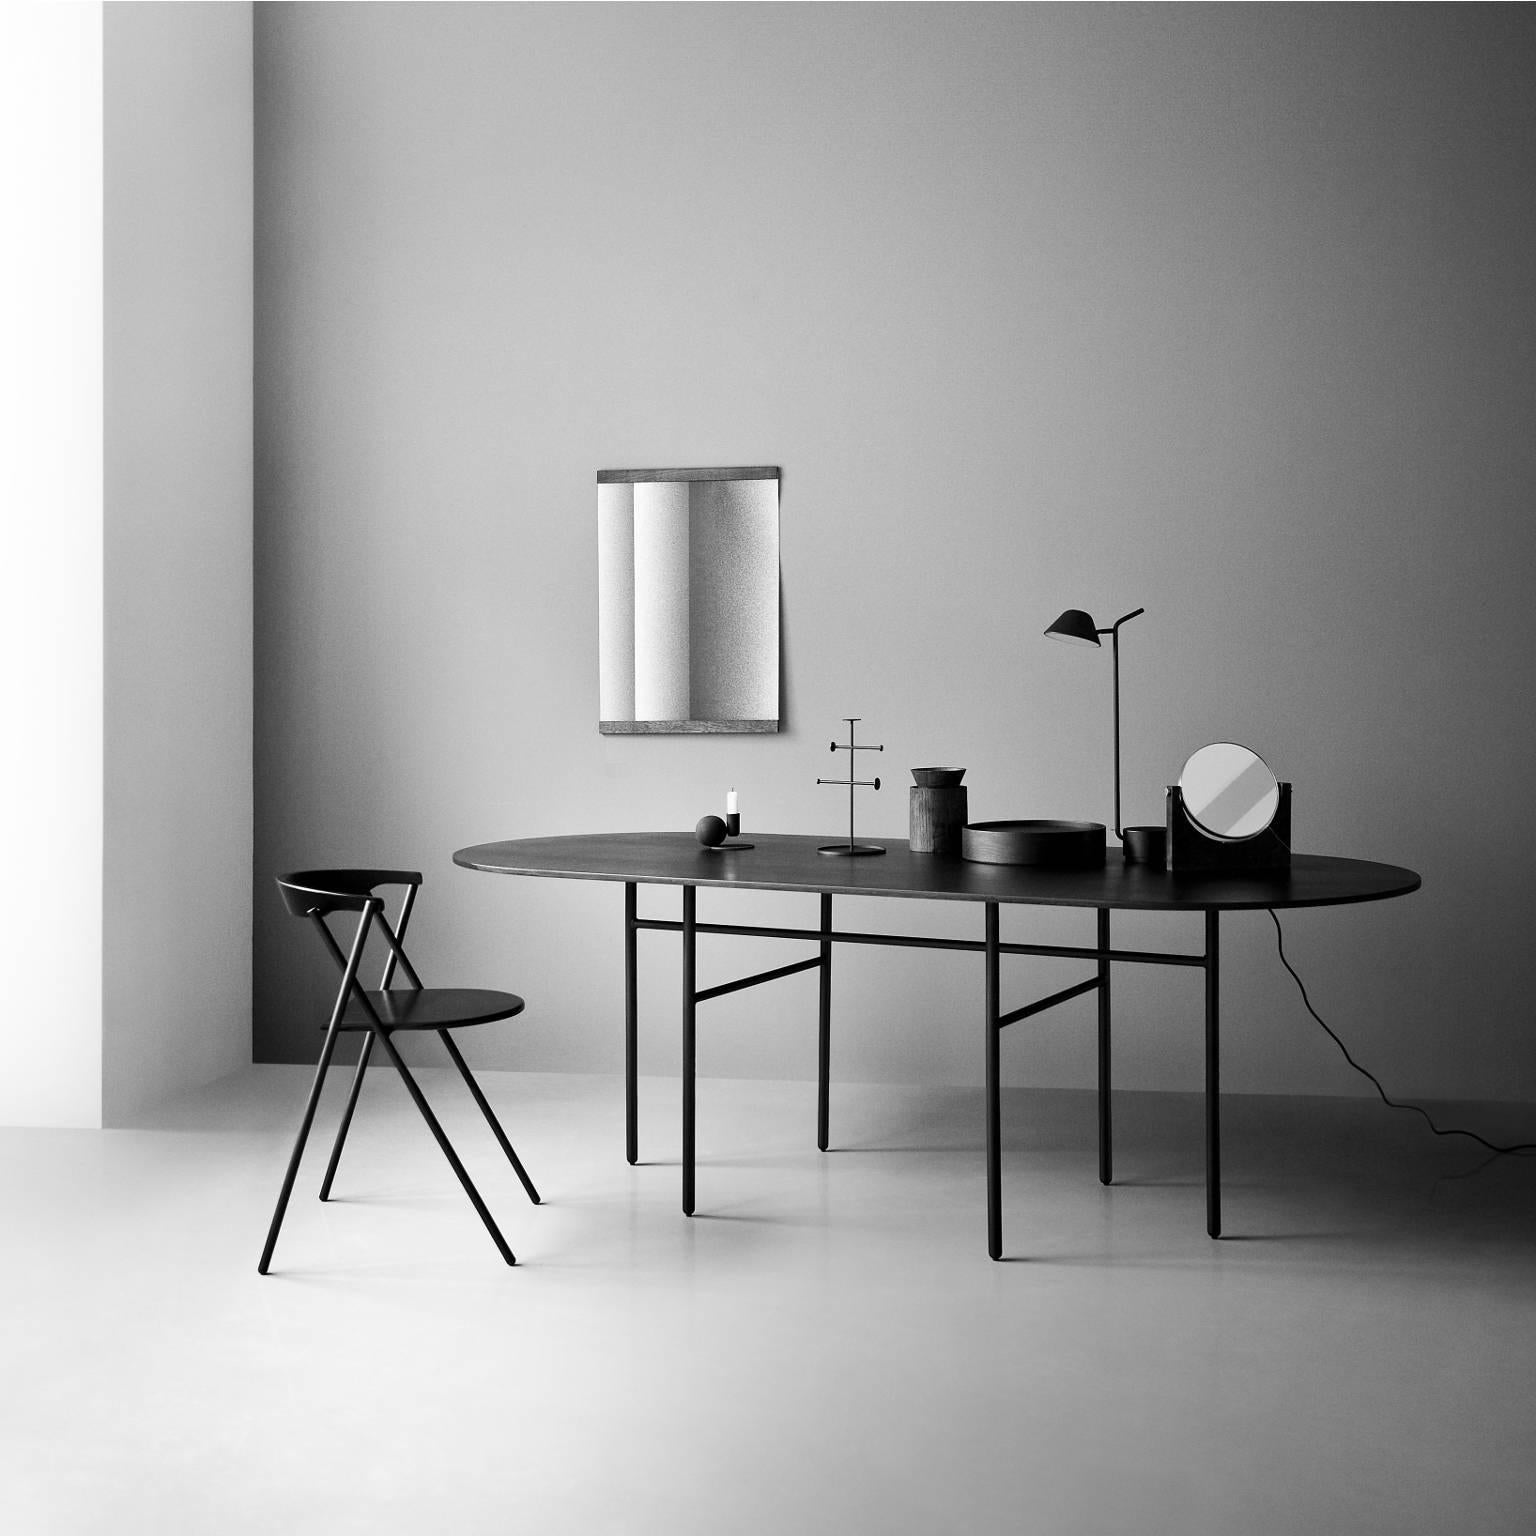 Thoroughly tested by founder and creative management.

Originally Norm Architects designed a table especially for Bjarne Hansen – the creative director and founder at Menu. The table was meant for Bjarnes living room at home. While at it, Norm